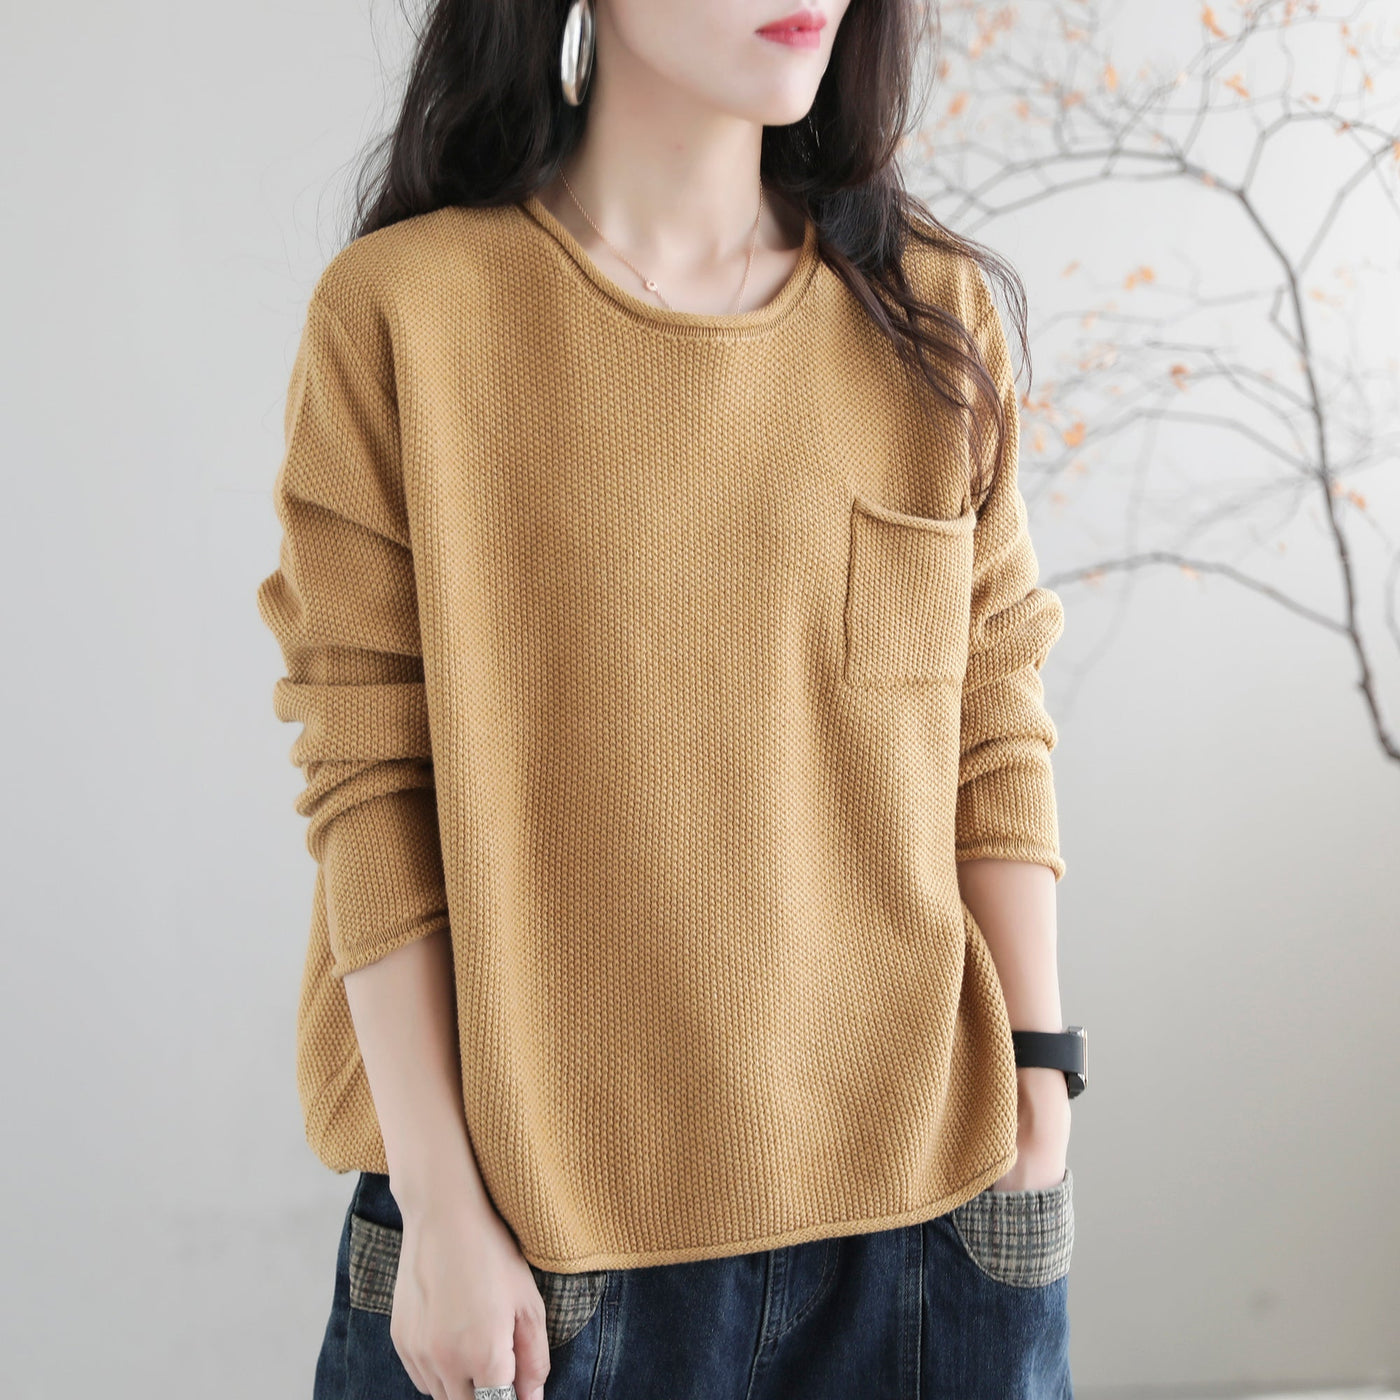 Women Autumn Solid Retro Cotton Knitted Sweater Aug 2022 New Arrival 